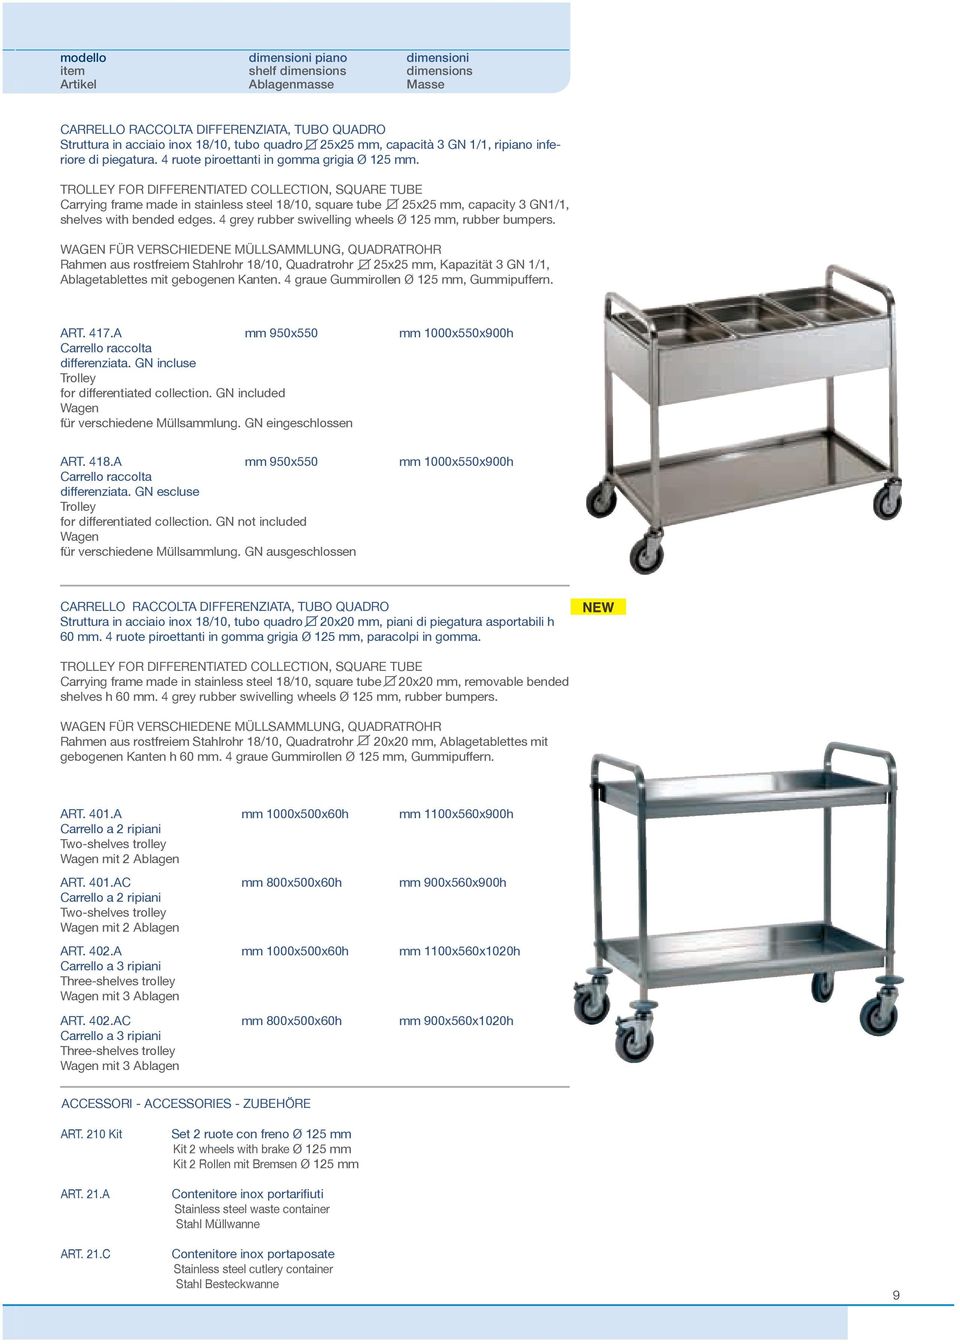 TROLLEY FOR DIFFERENTIATED COLLECTION, SQUARE TUBE Carrying frame made in stainless steel 18/10, square tube 25x25 mm, capacity 3 GN1/1, shelves with bended edges.